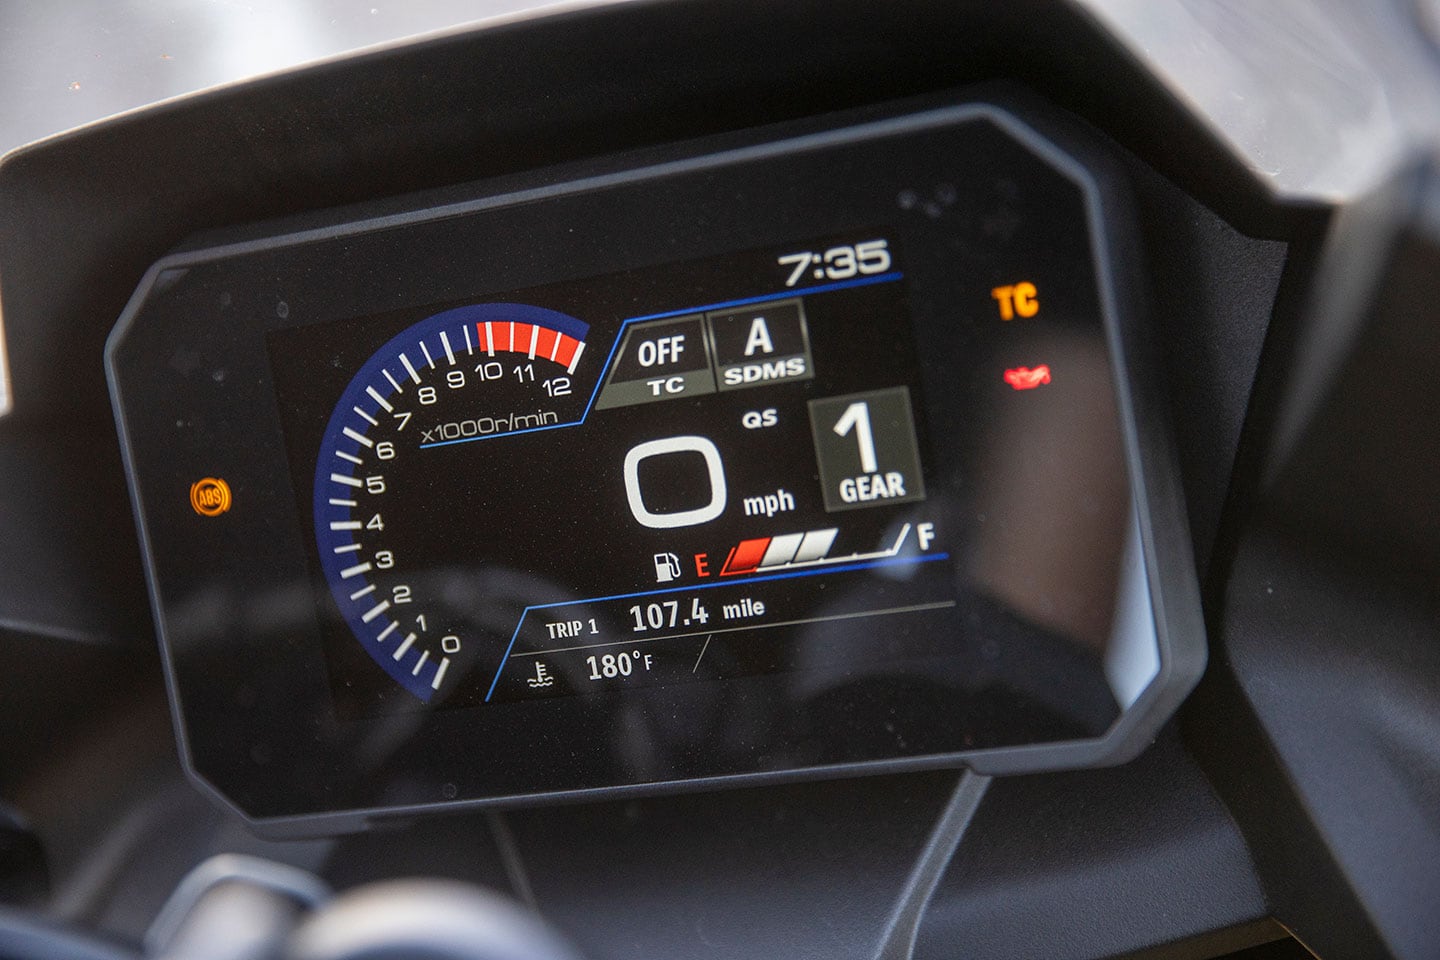 Suzuki’s 5-inch TFT is by far the best of our group, with easy legibility, navigation of menus, and good layout.